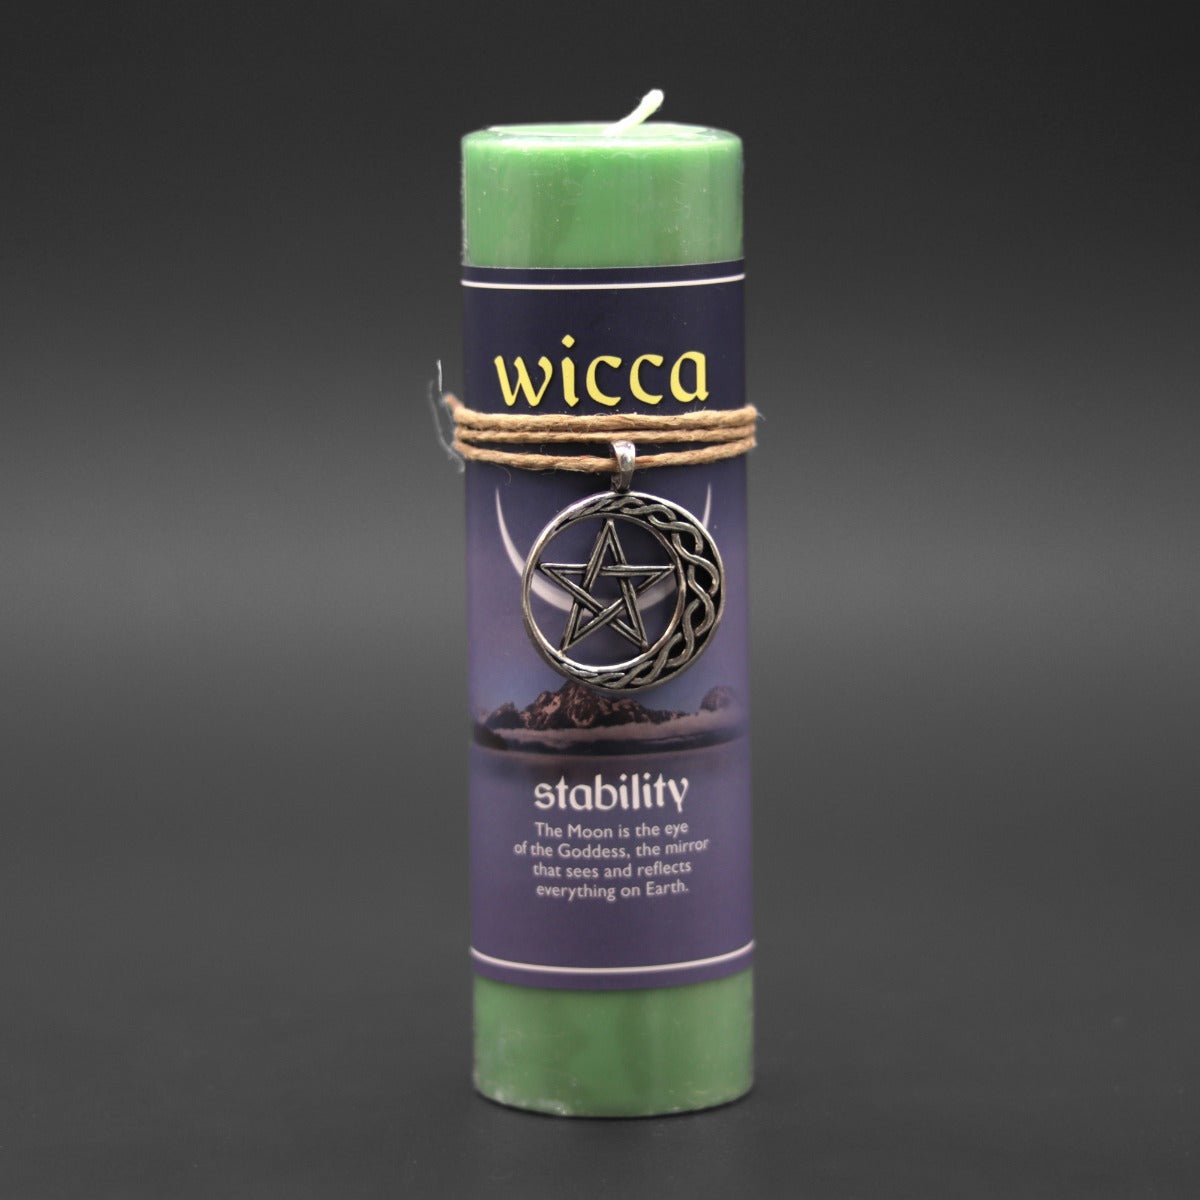 Wicca Stability Candle with Pendant - 13 Moons